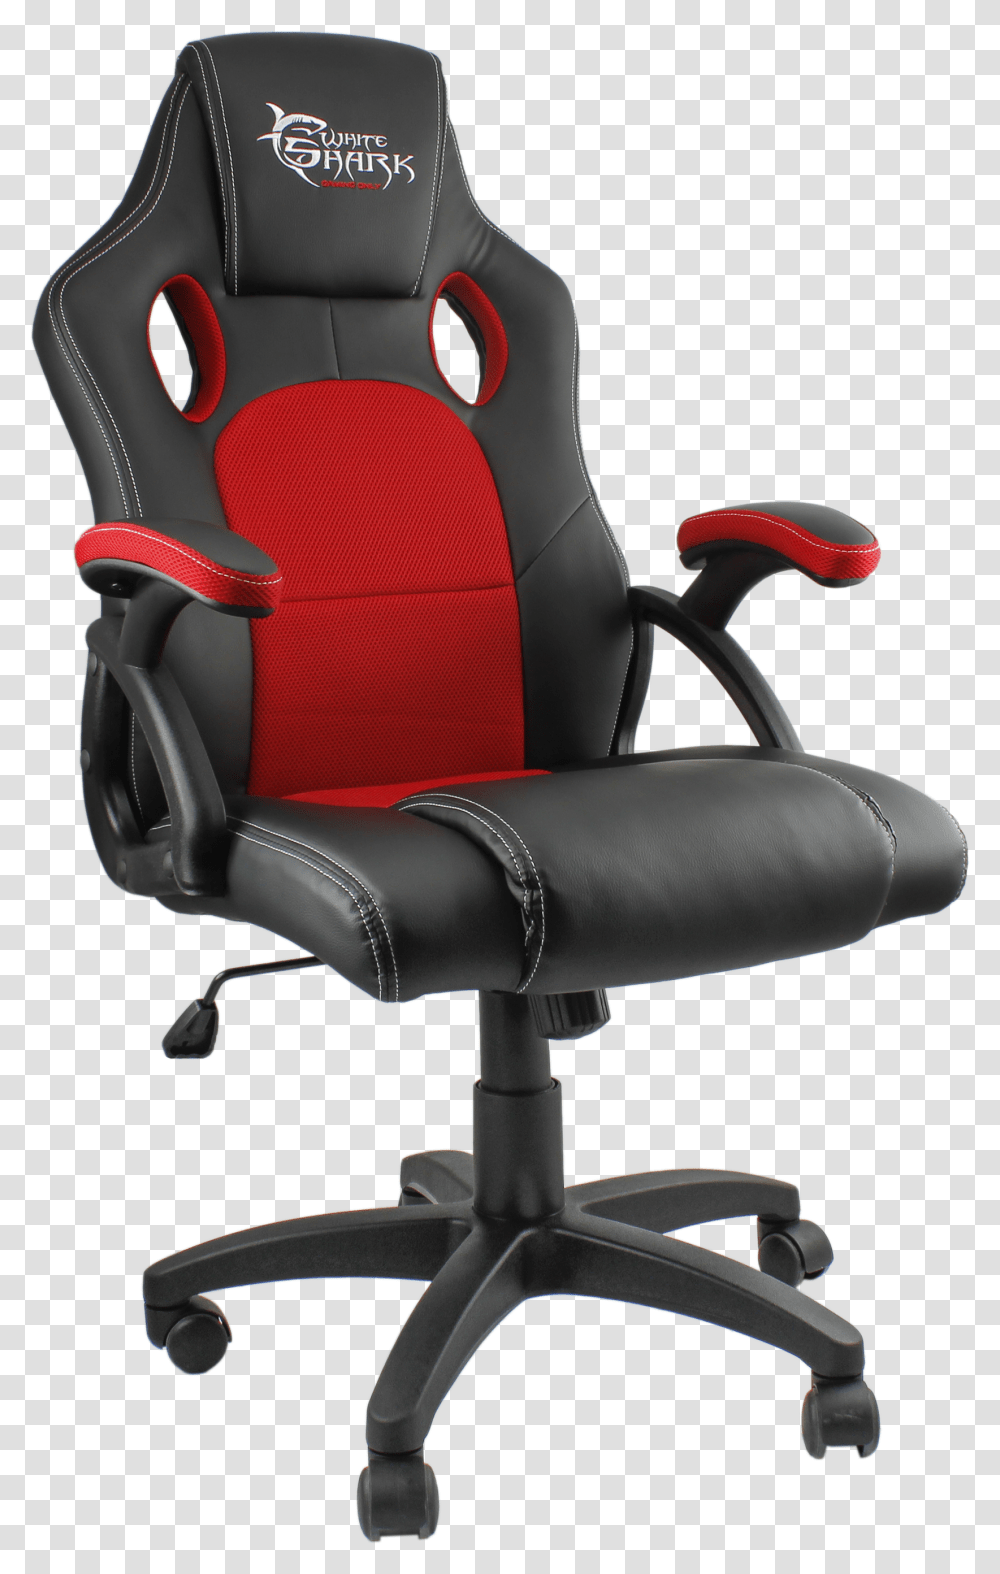 White Shark Gaming Chair Kings Throne Blackred Whiteshark White Shark Gaming Chair, Furniture, Cushion, Armchair Transparent Png